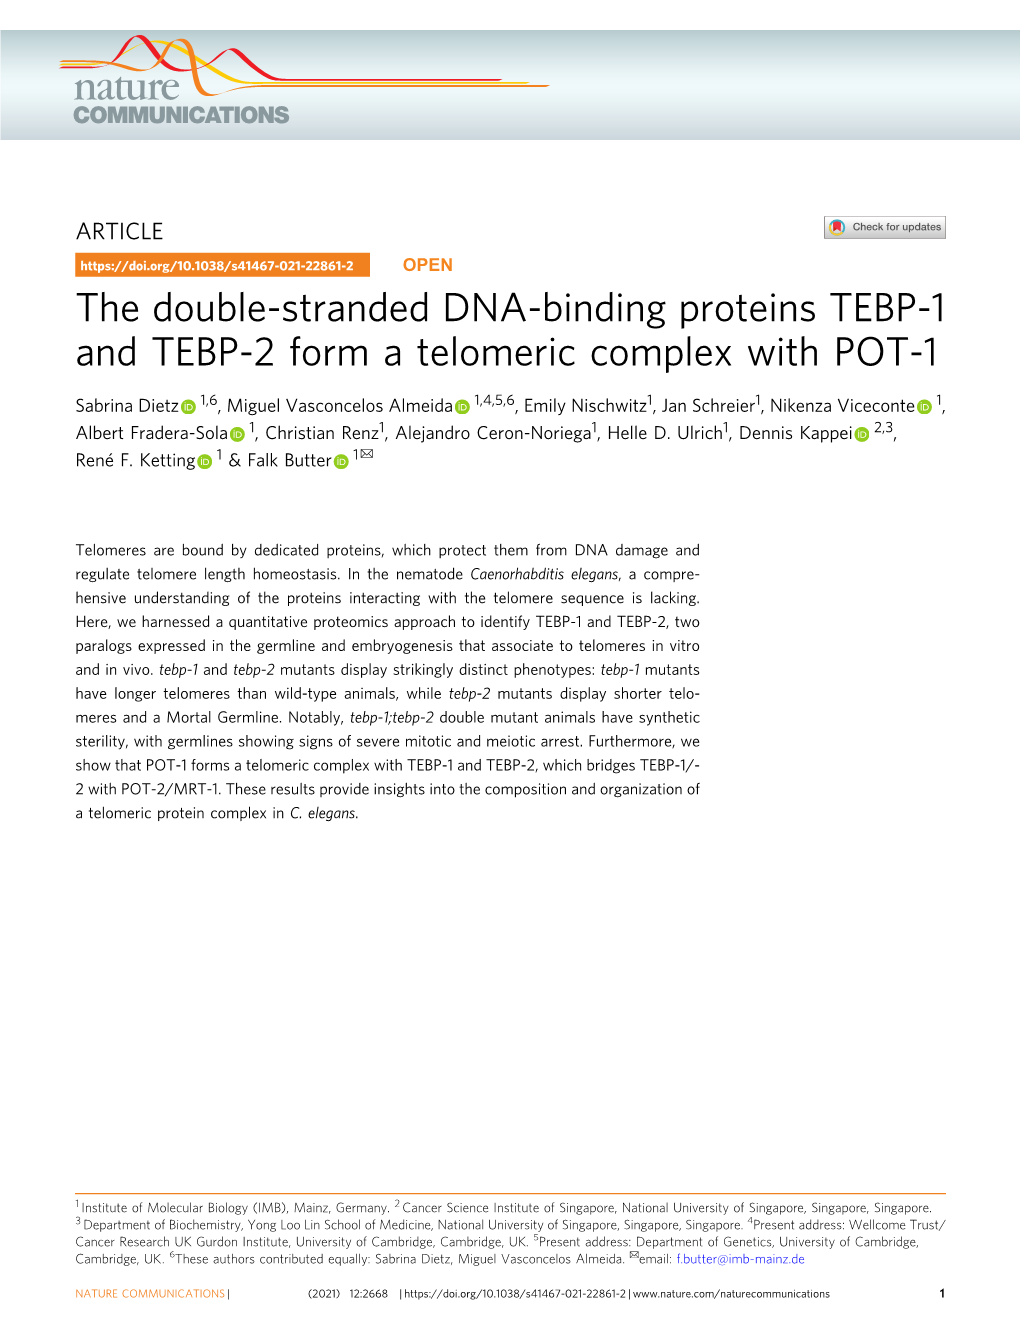 The Double-Stranded DNA-Binding Proteins TEBP-1 and TEBP-2 Form a Telomeric Complex with POT-1